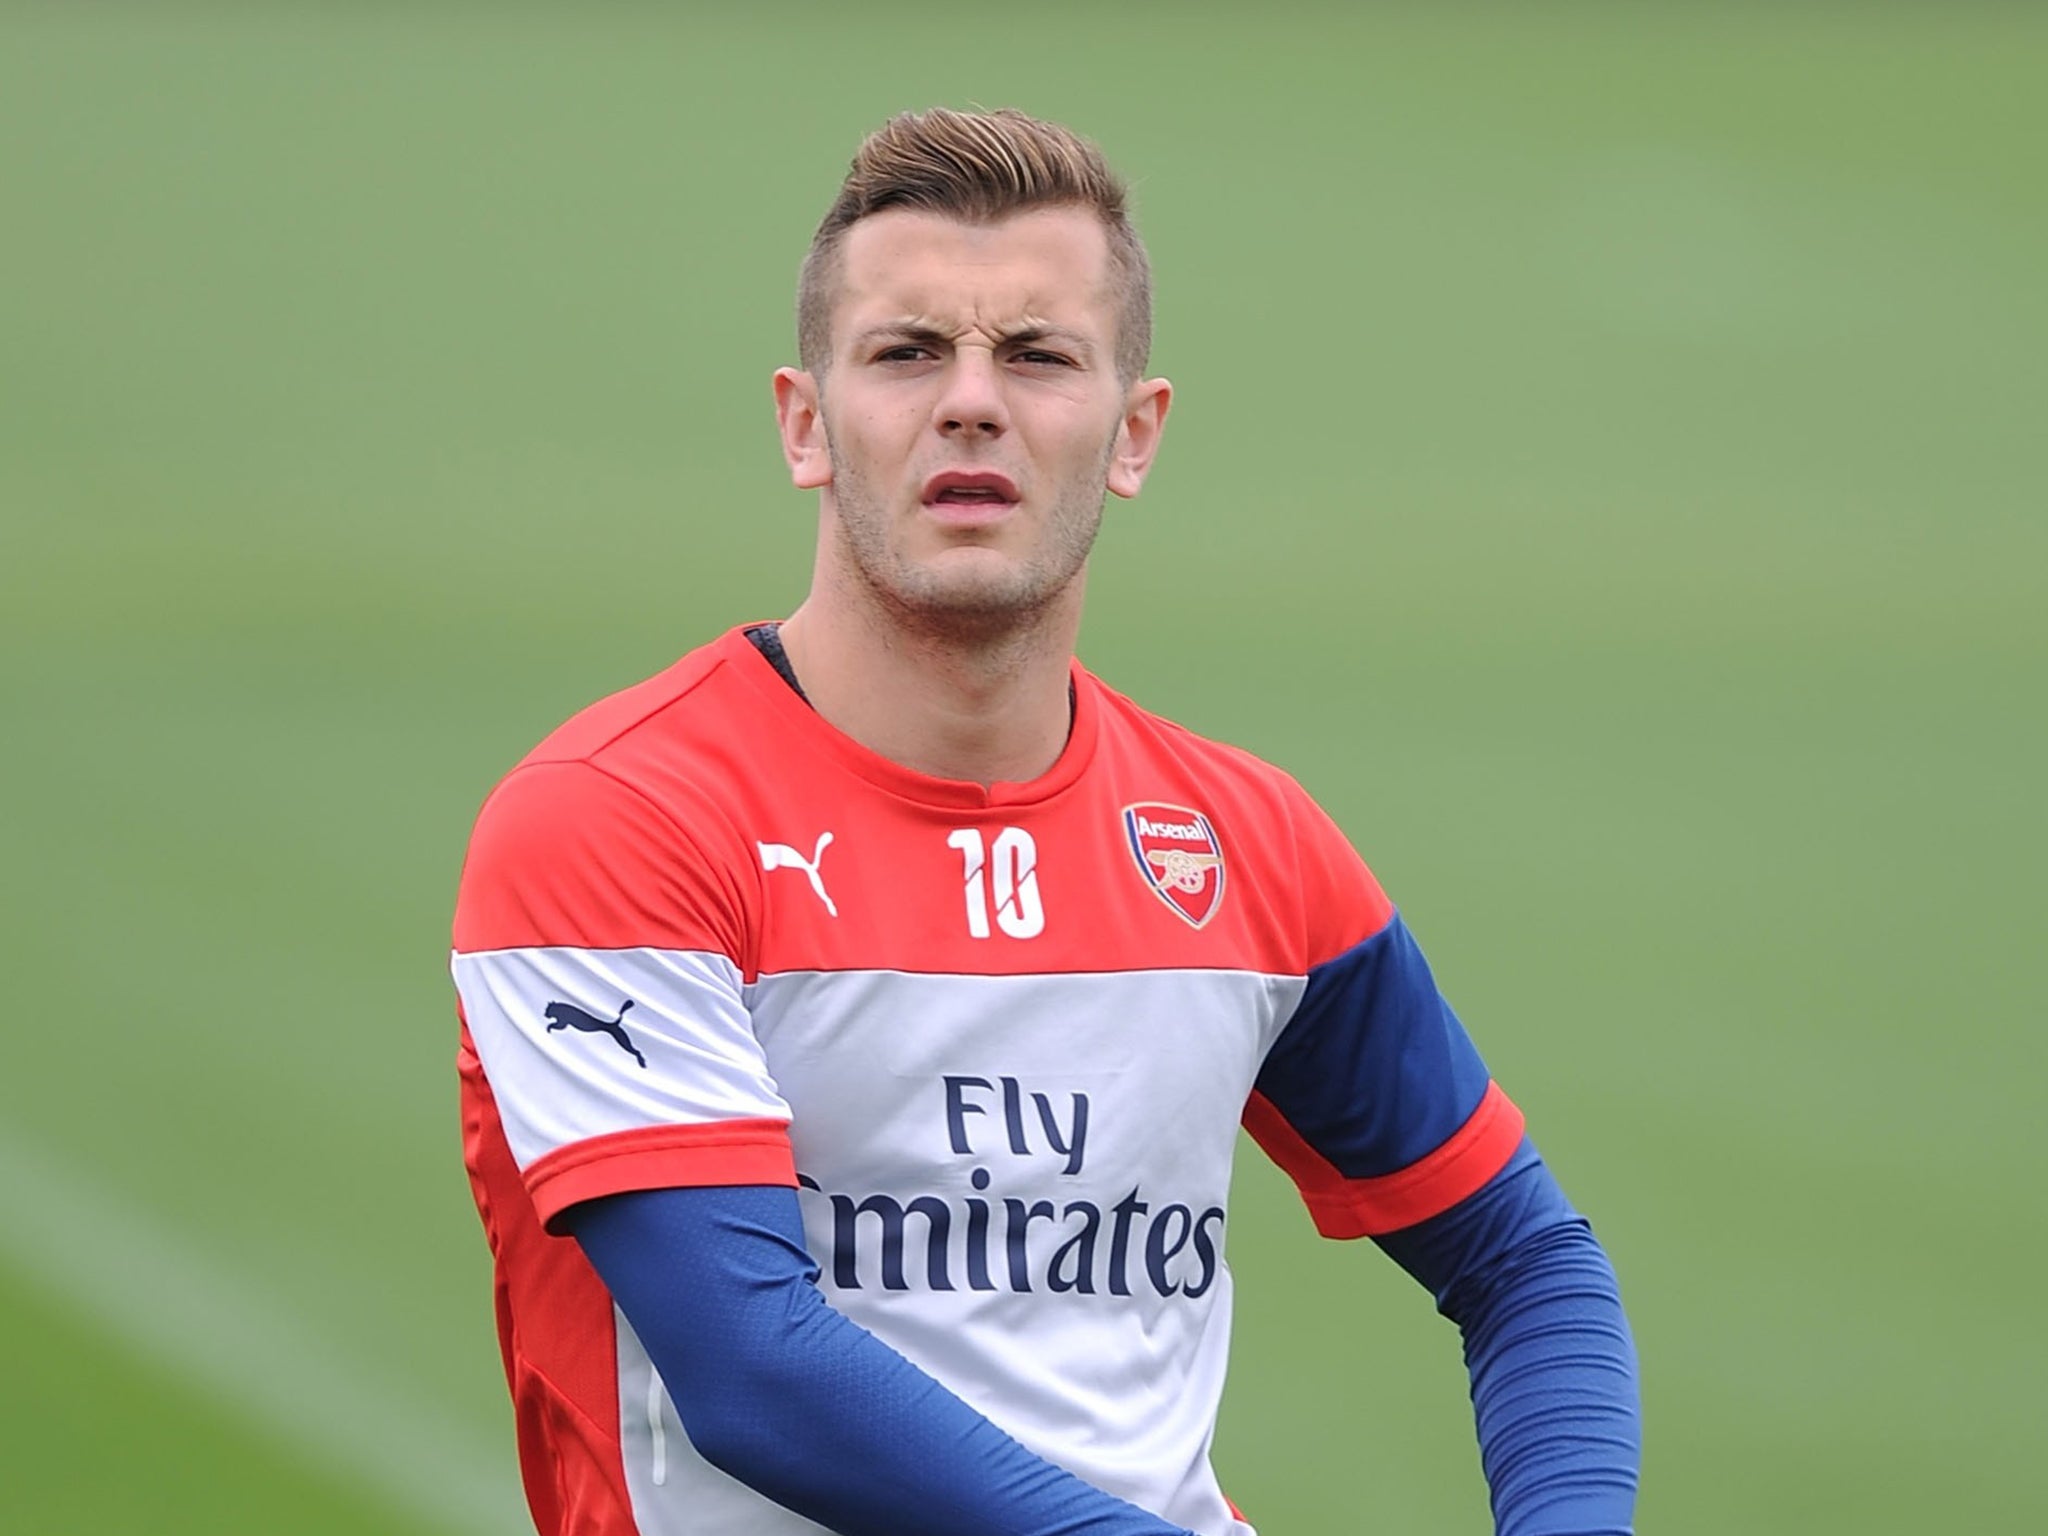 Jack Wilshere said: ‘In today’s market £16m is nothing really. We have got a bargain with Danny’